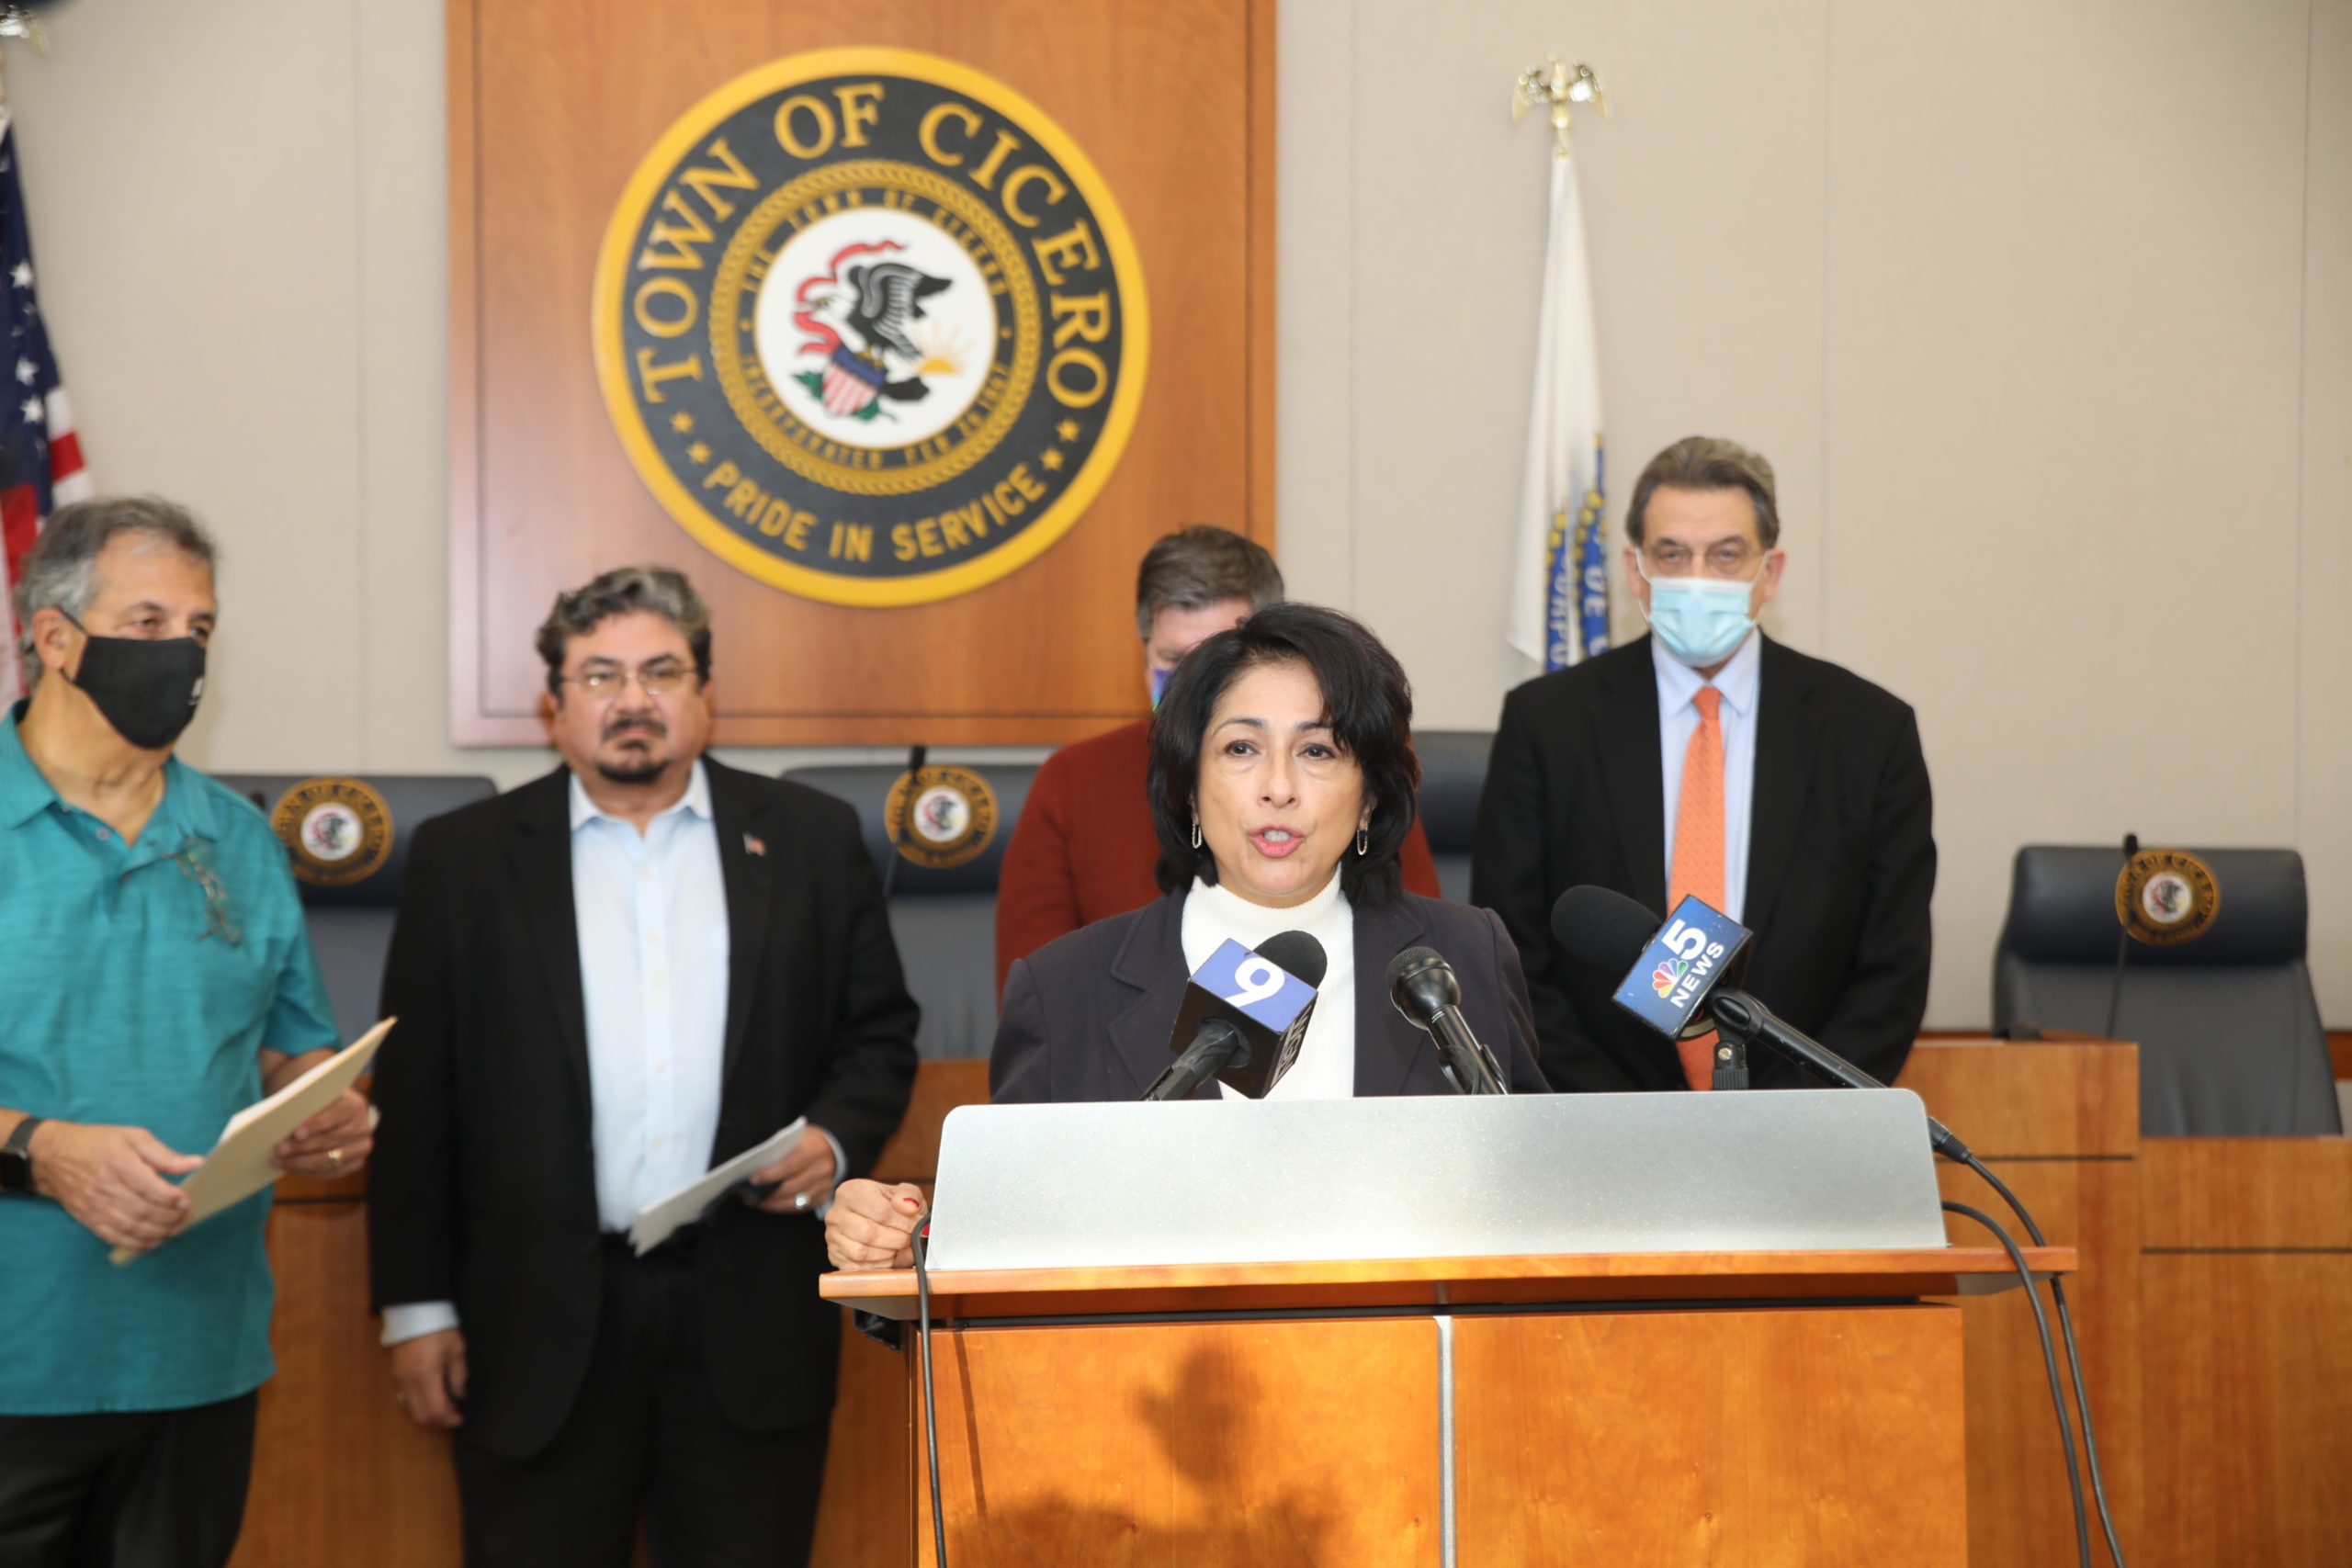 State Rep. Lisa Hernandez talks about legislation of force the BNSF Railway to be accountable to residents of Cicero and other suburban communities whose properties have been damaged by BNSF rainwater run-off flooding caused by BNSF resurfacing projects